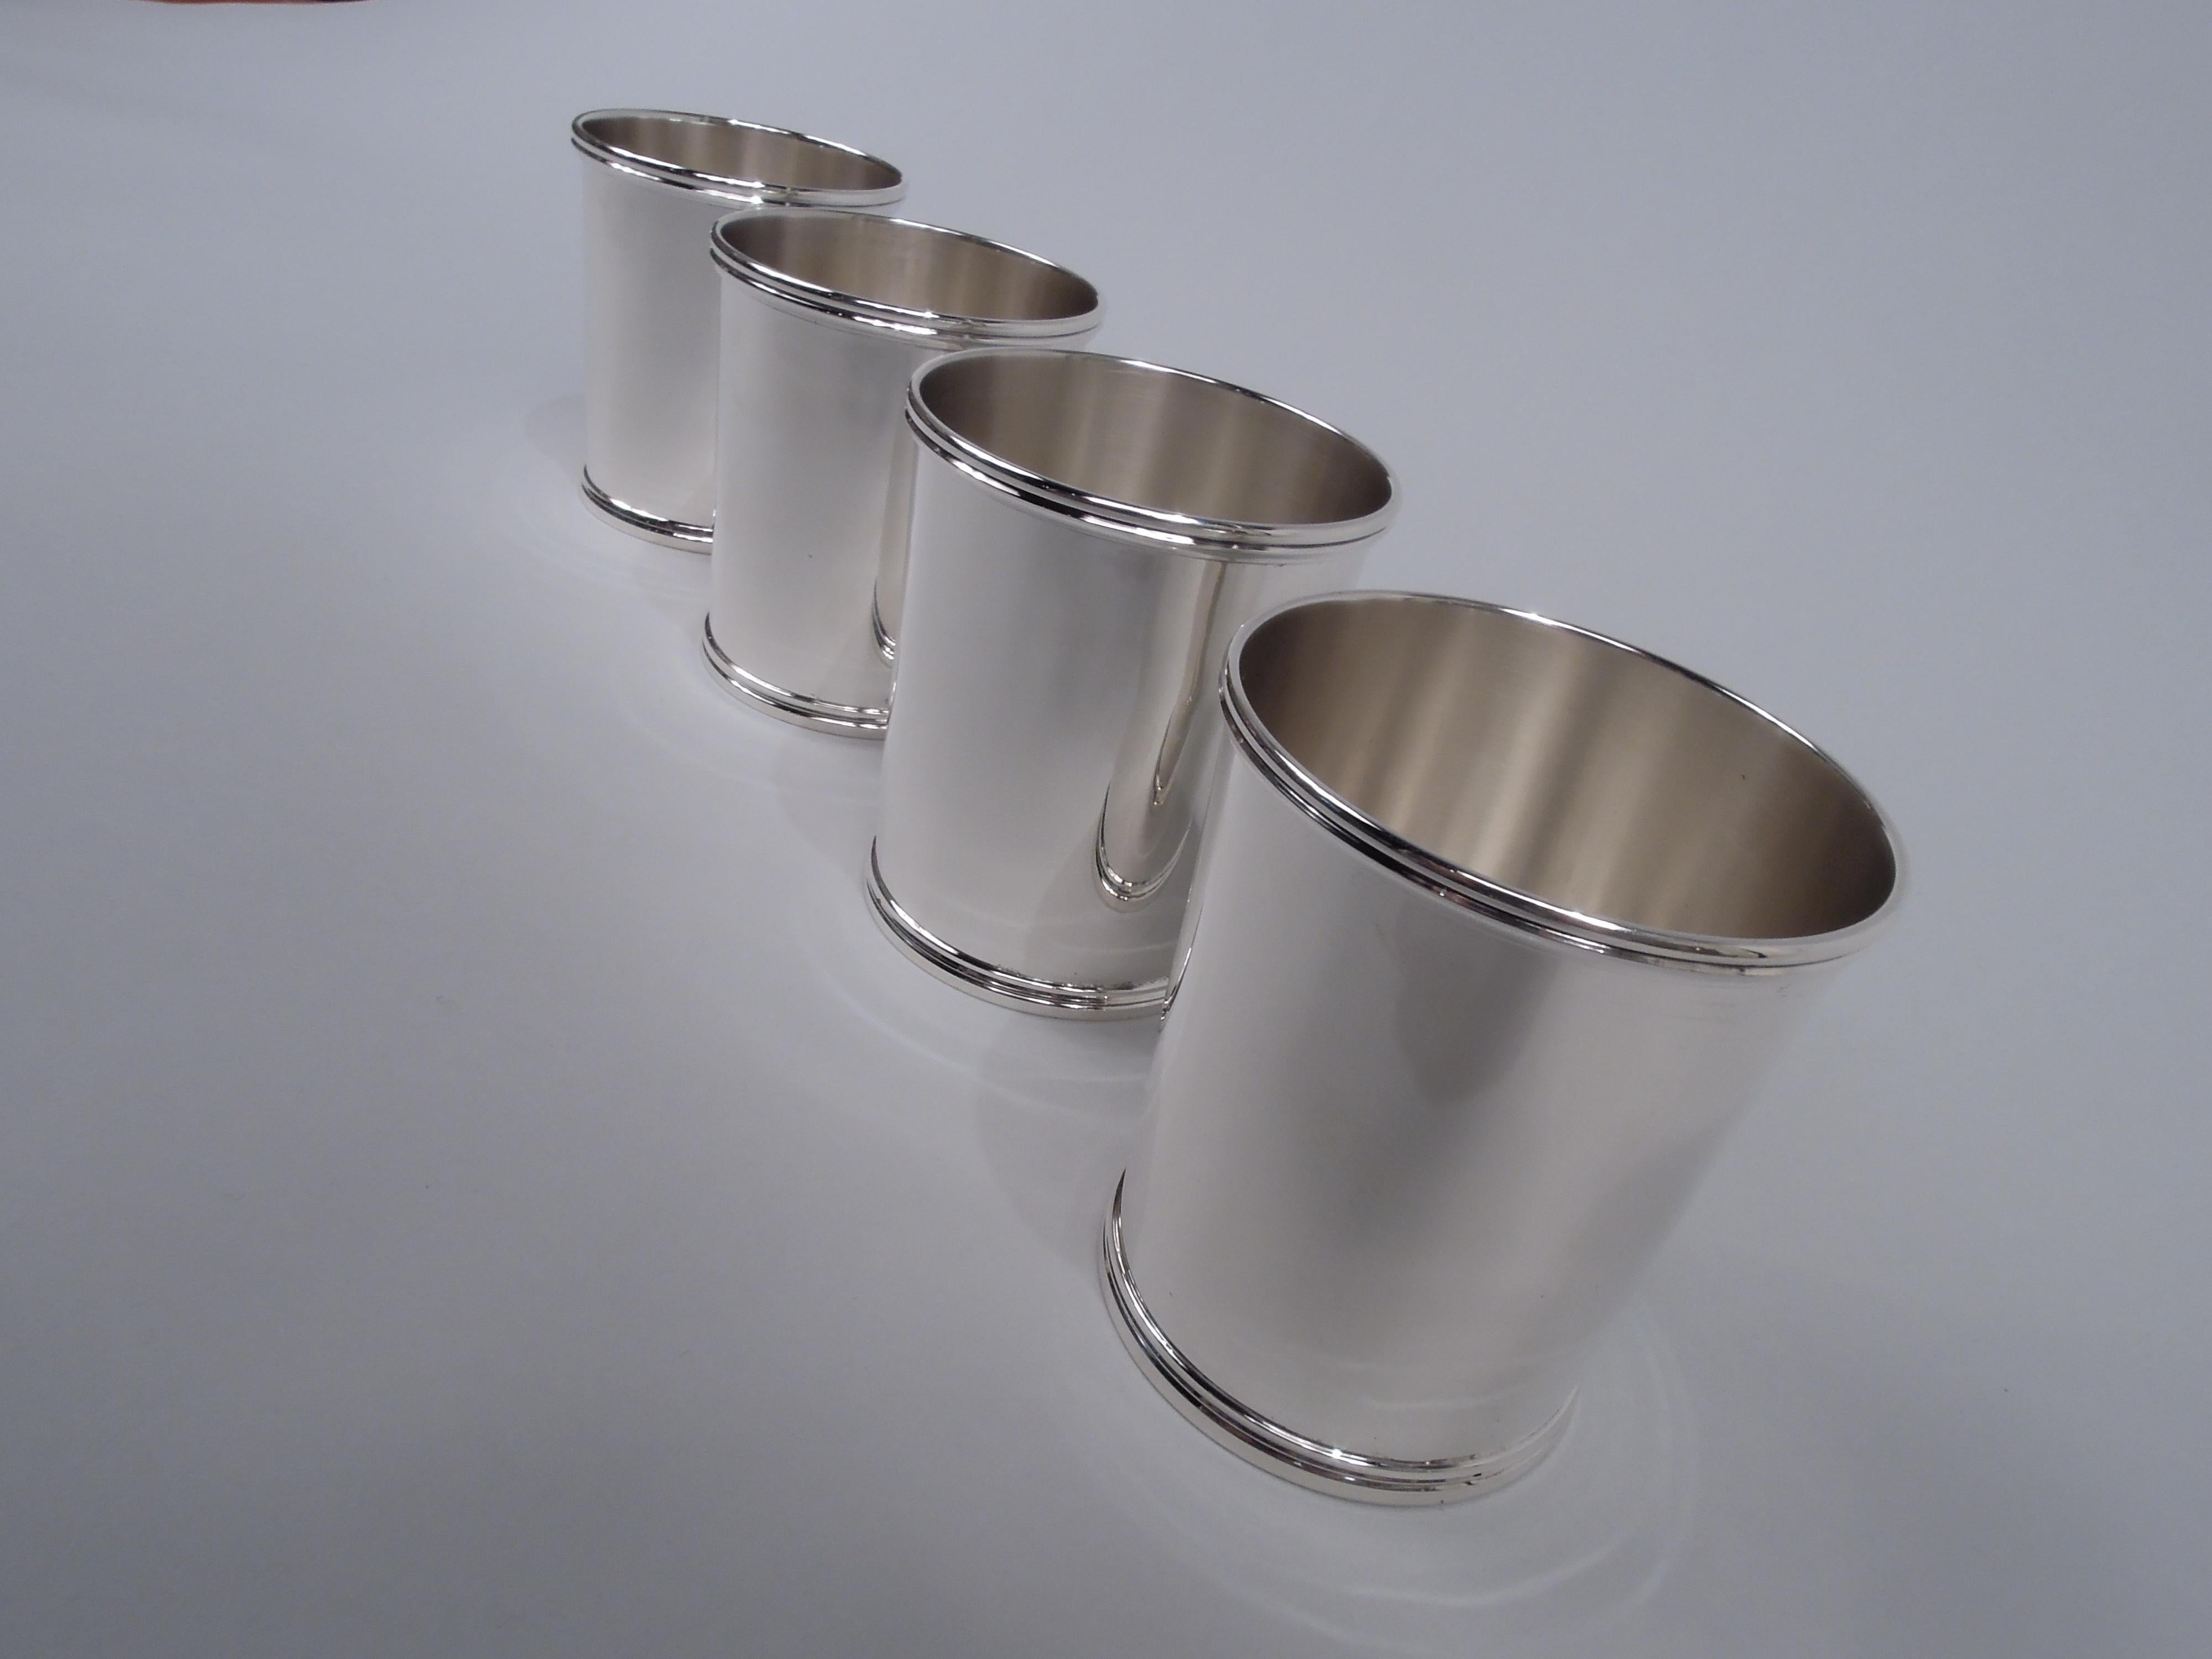 Set of 4 Federal-style sterling silver mint julep cups. Made by Spaulding & Co. (part of Gorham) in Chicago, ca 1920. Each: Straight and gently tapering sides and molded rims. A wonderful way to relax and reflect on the founding years of the